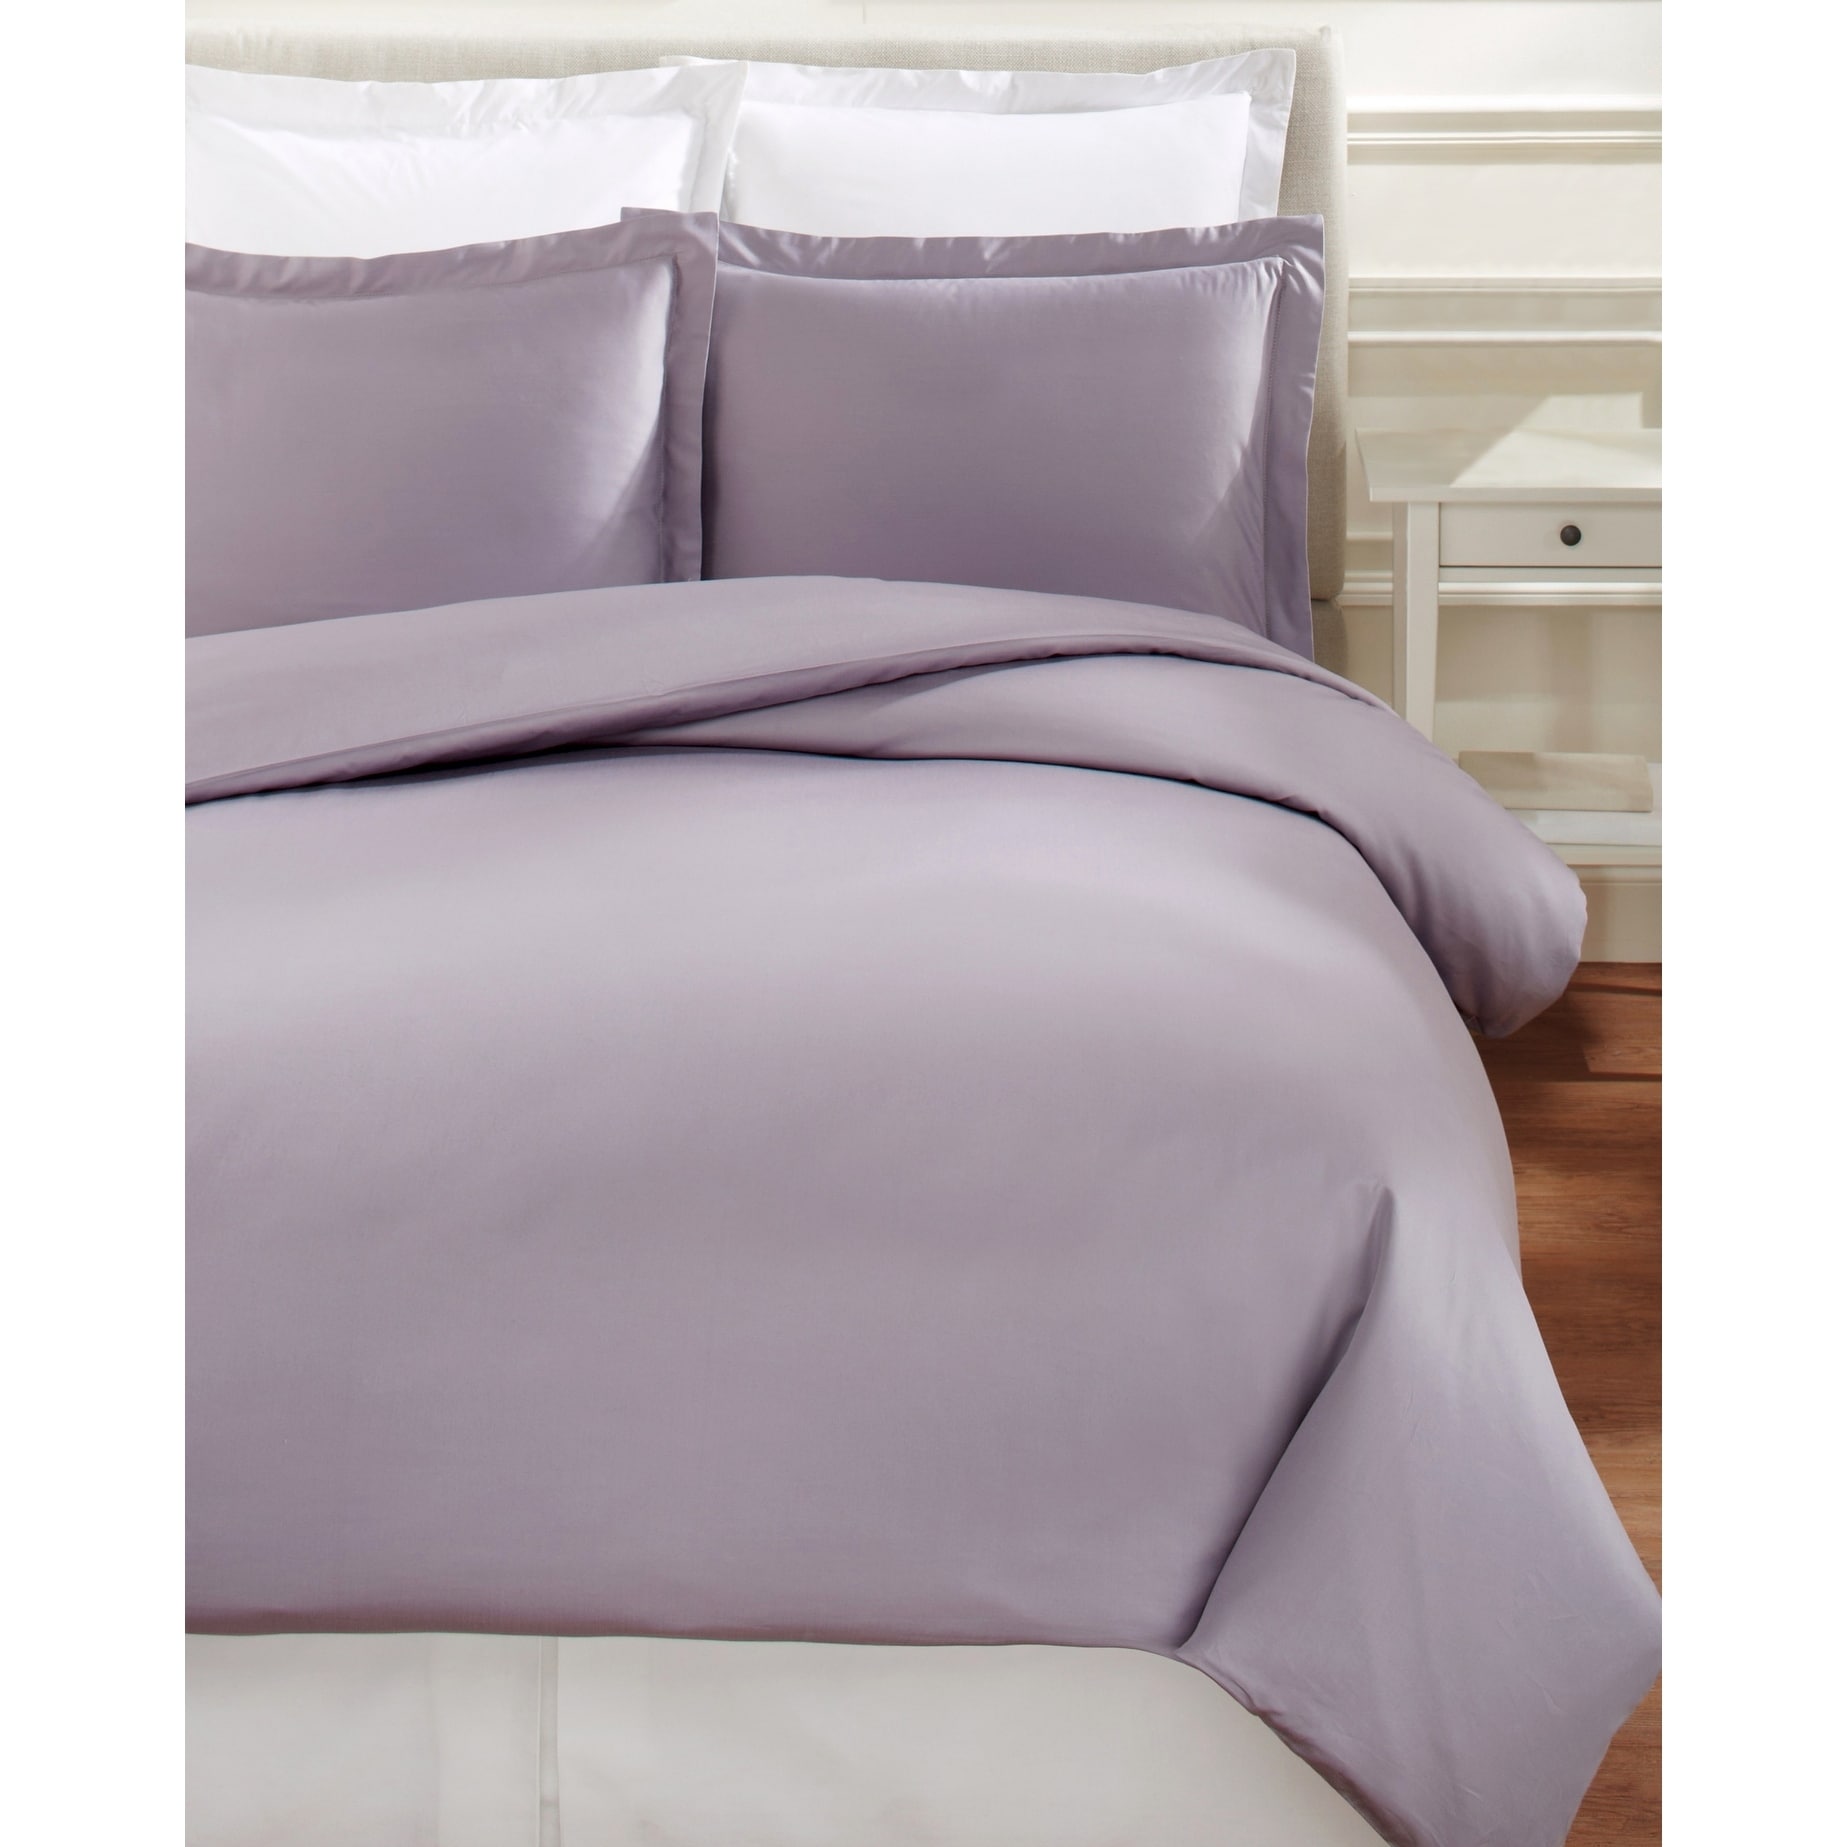 3 Piece, Embroidered, Top Rated Duvet Covers and Sets - Bed Bath